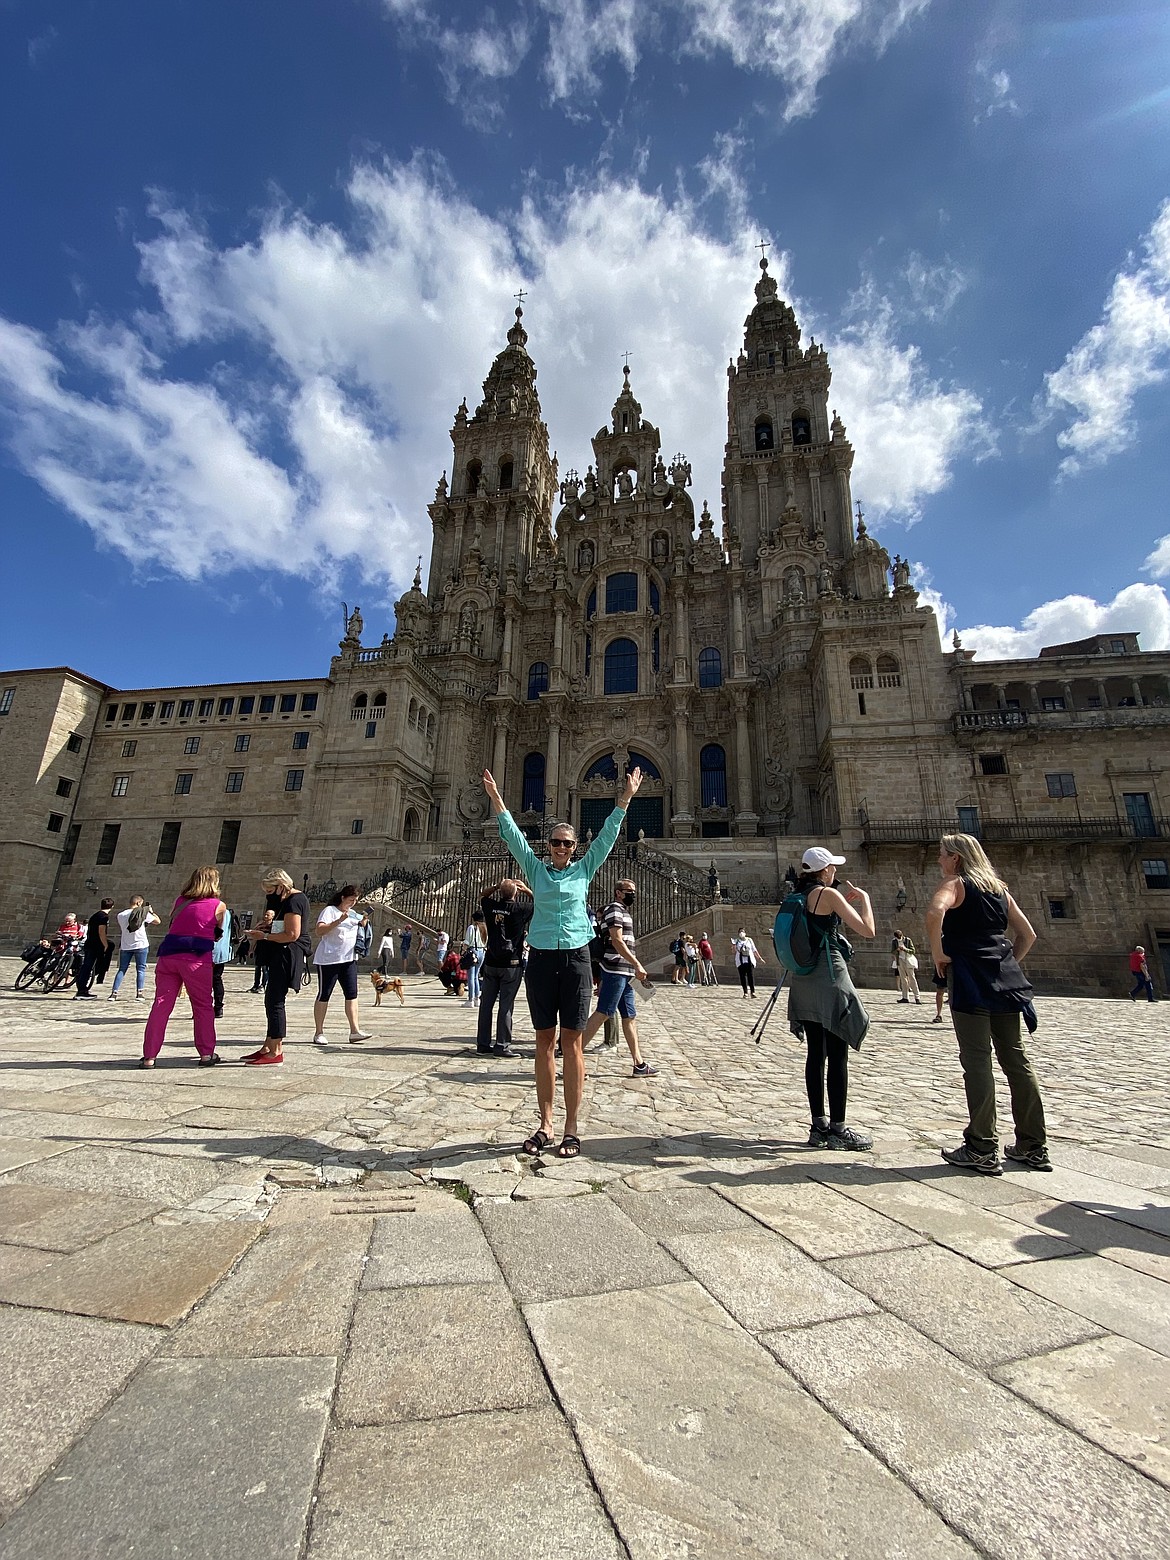 Post Falls resident Susan Jacobson celebrates her arrival in front of the Santiago de Compostela, the possible burial site of St. James.
Courtesy photo